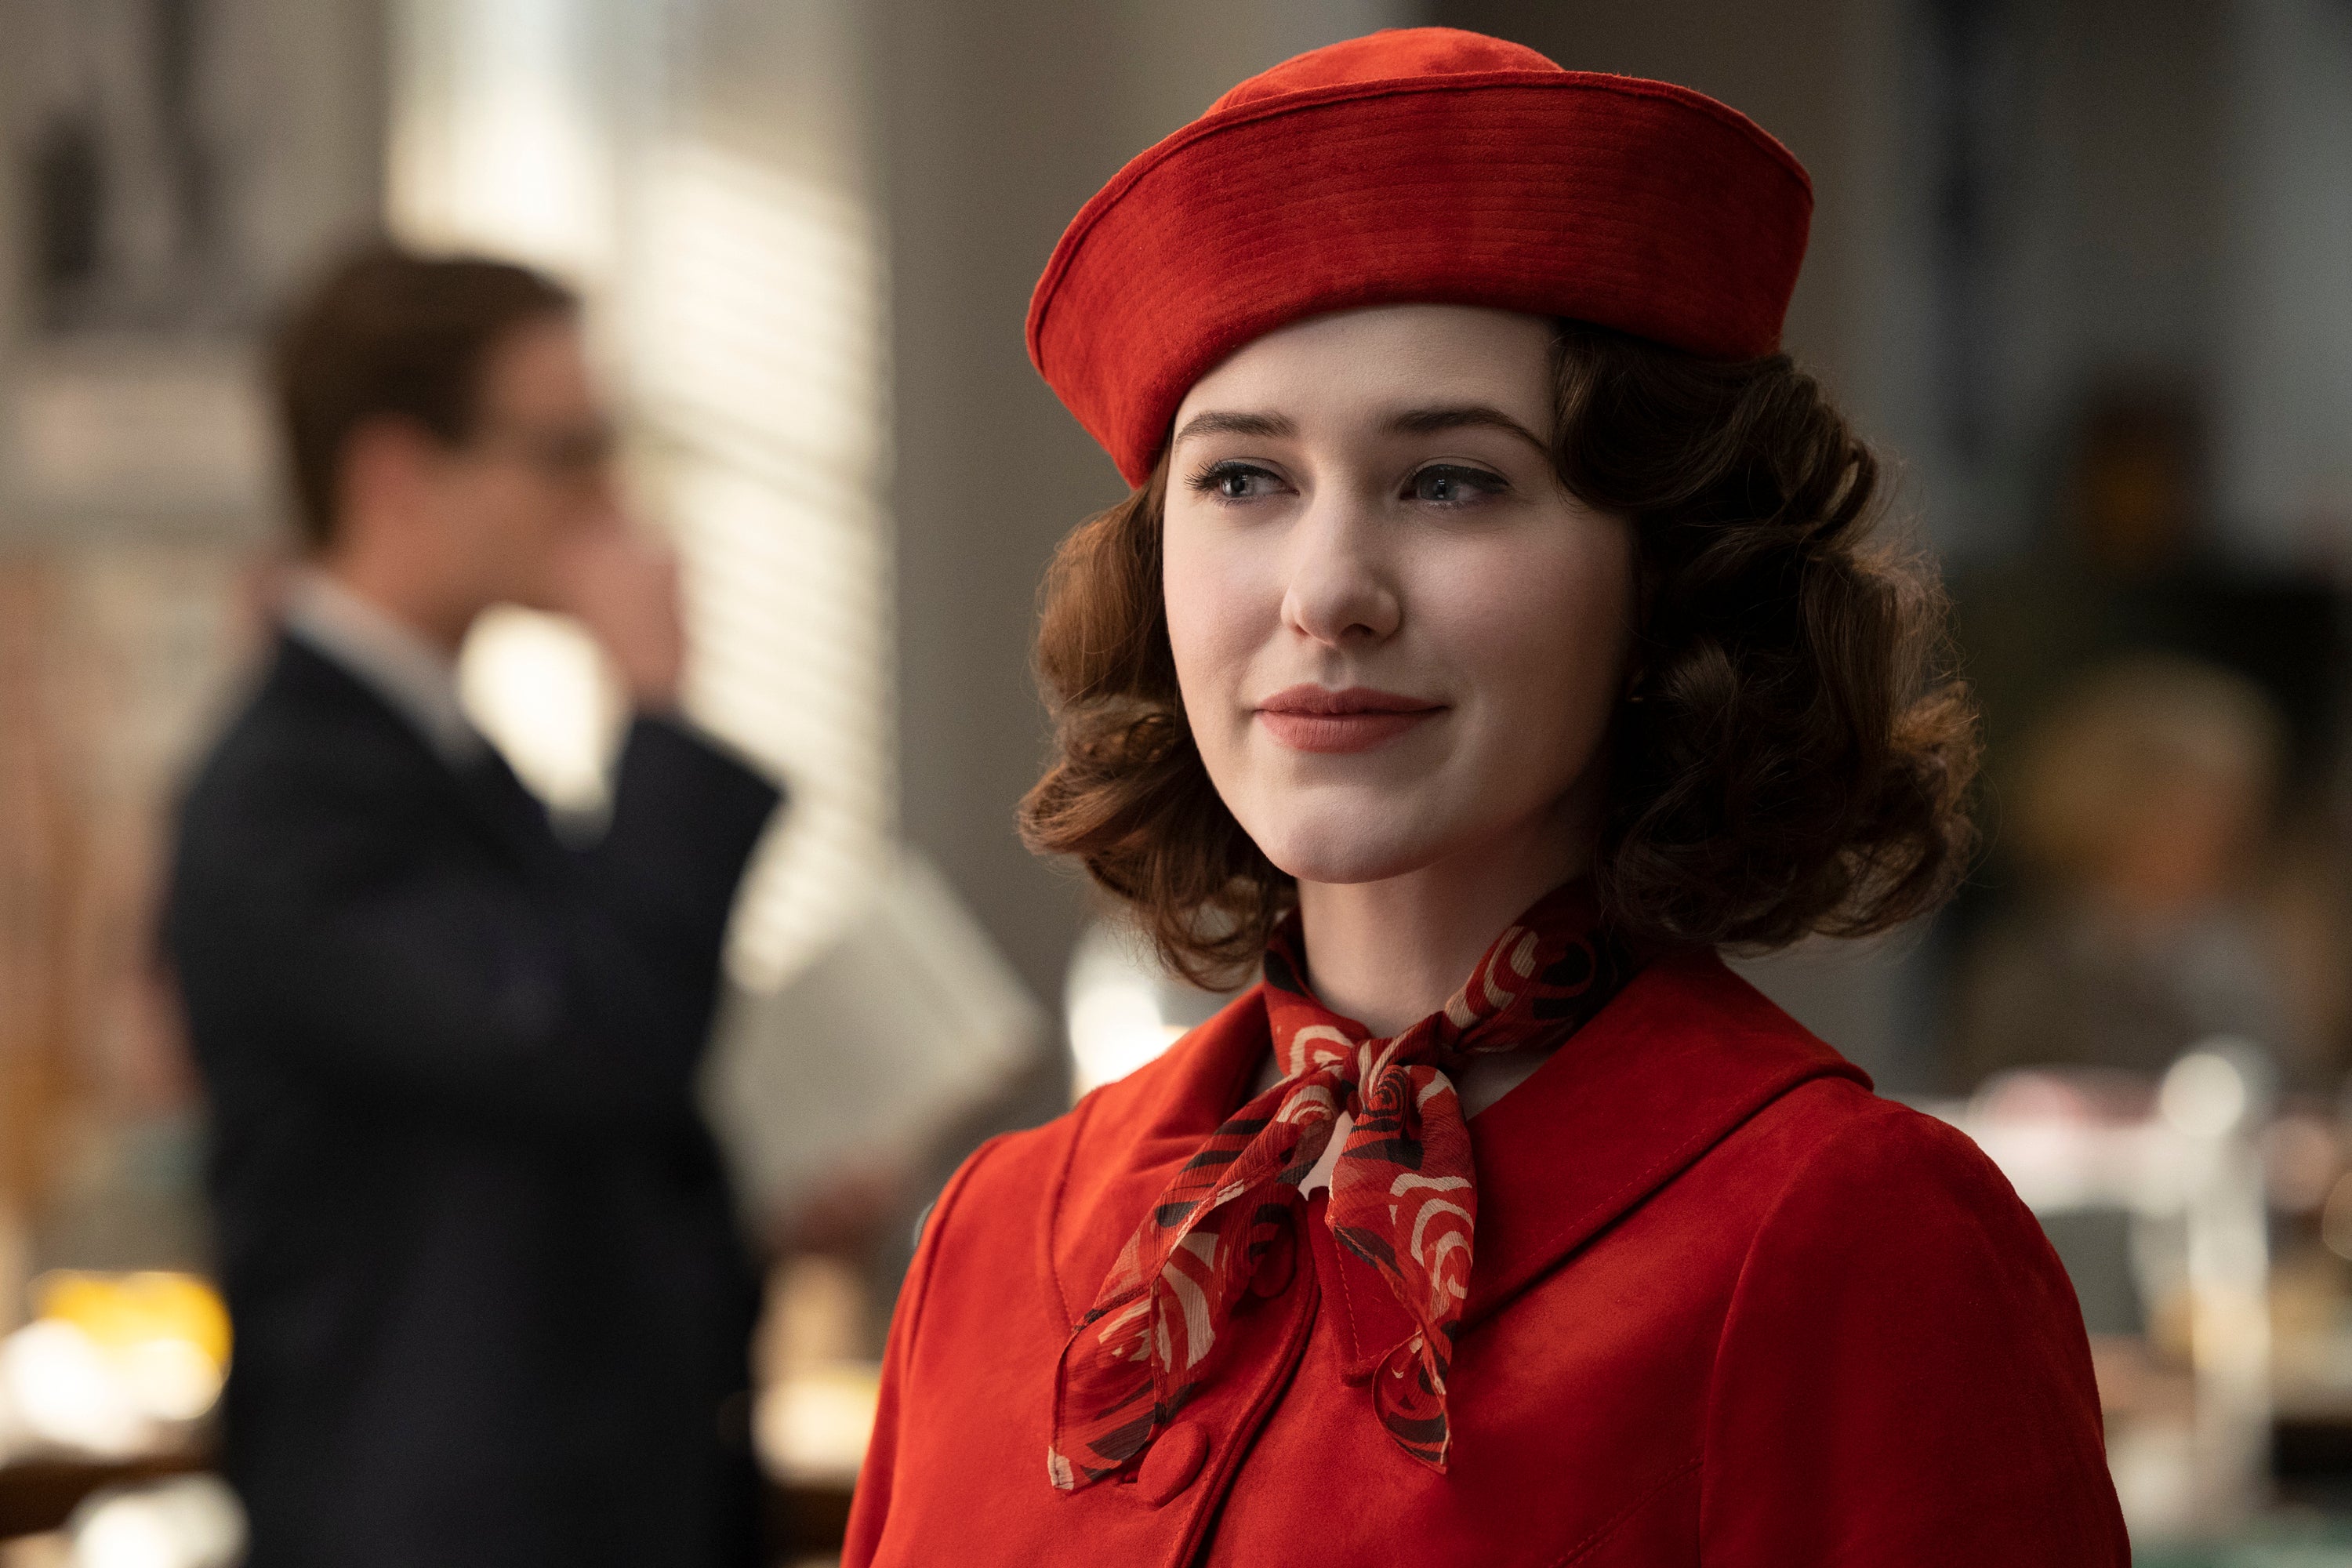 Maisel costumes enhance storytelling with boldness, color The Independent